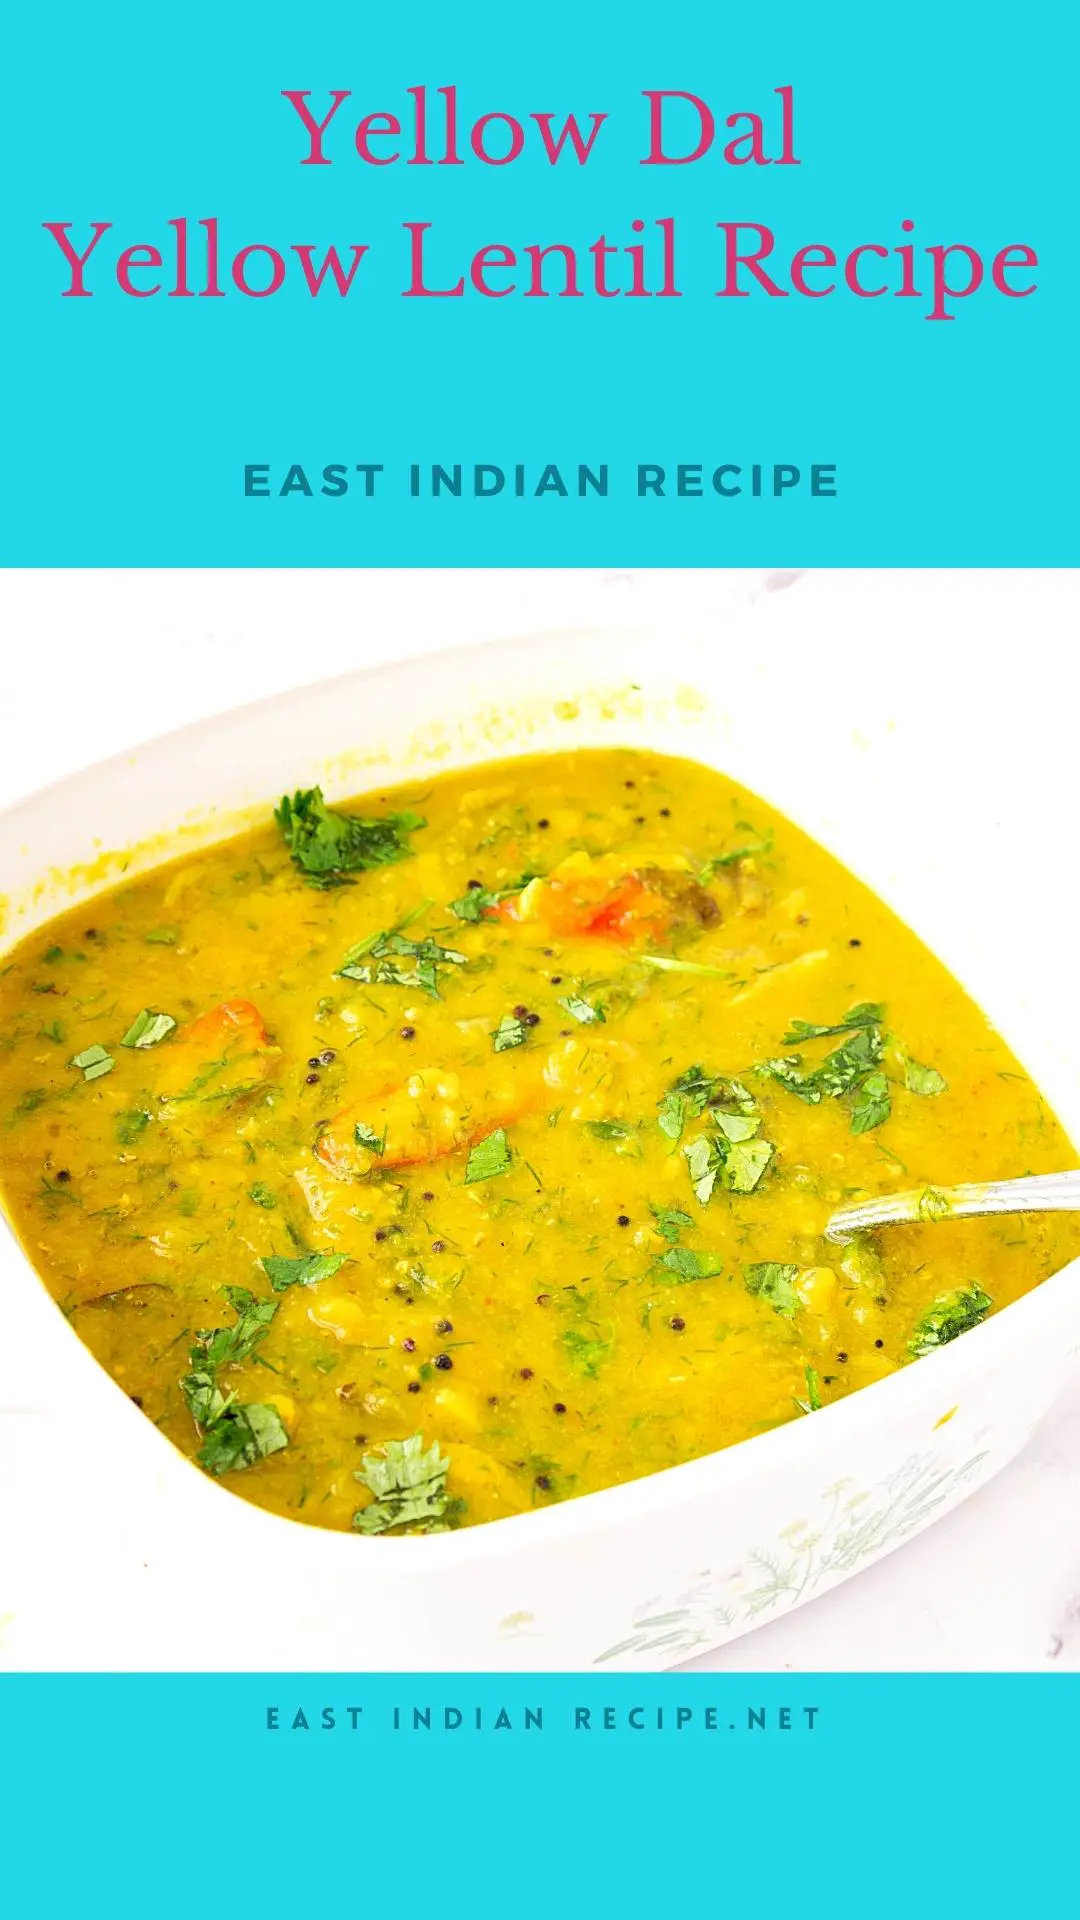 Yellow Dal - Yellow Lentil Recipe (Indian) - East Indian Recipes